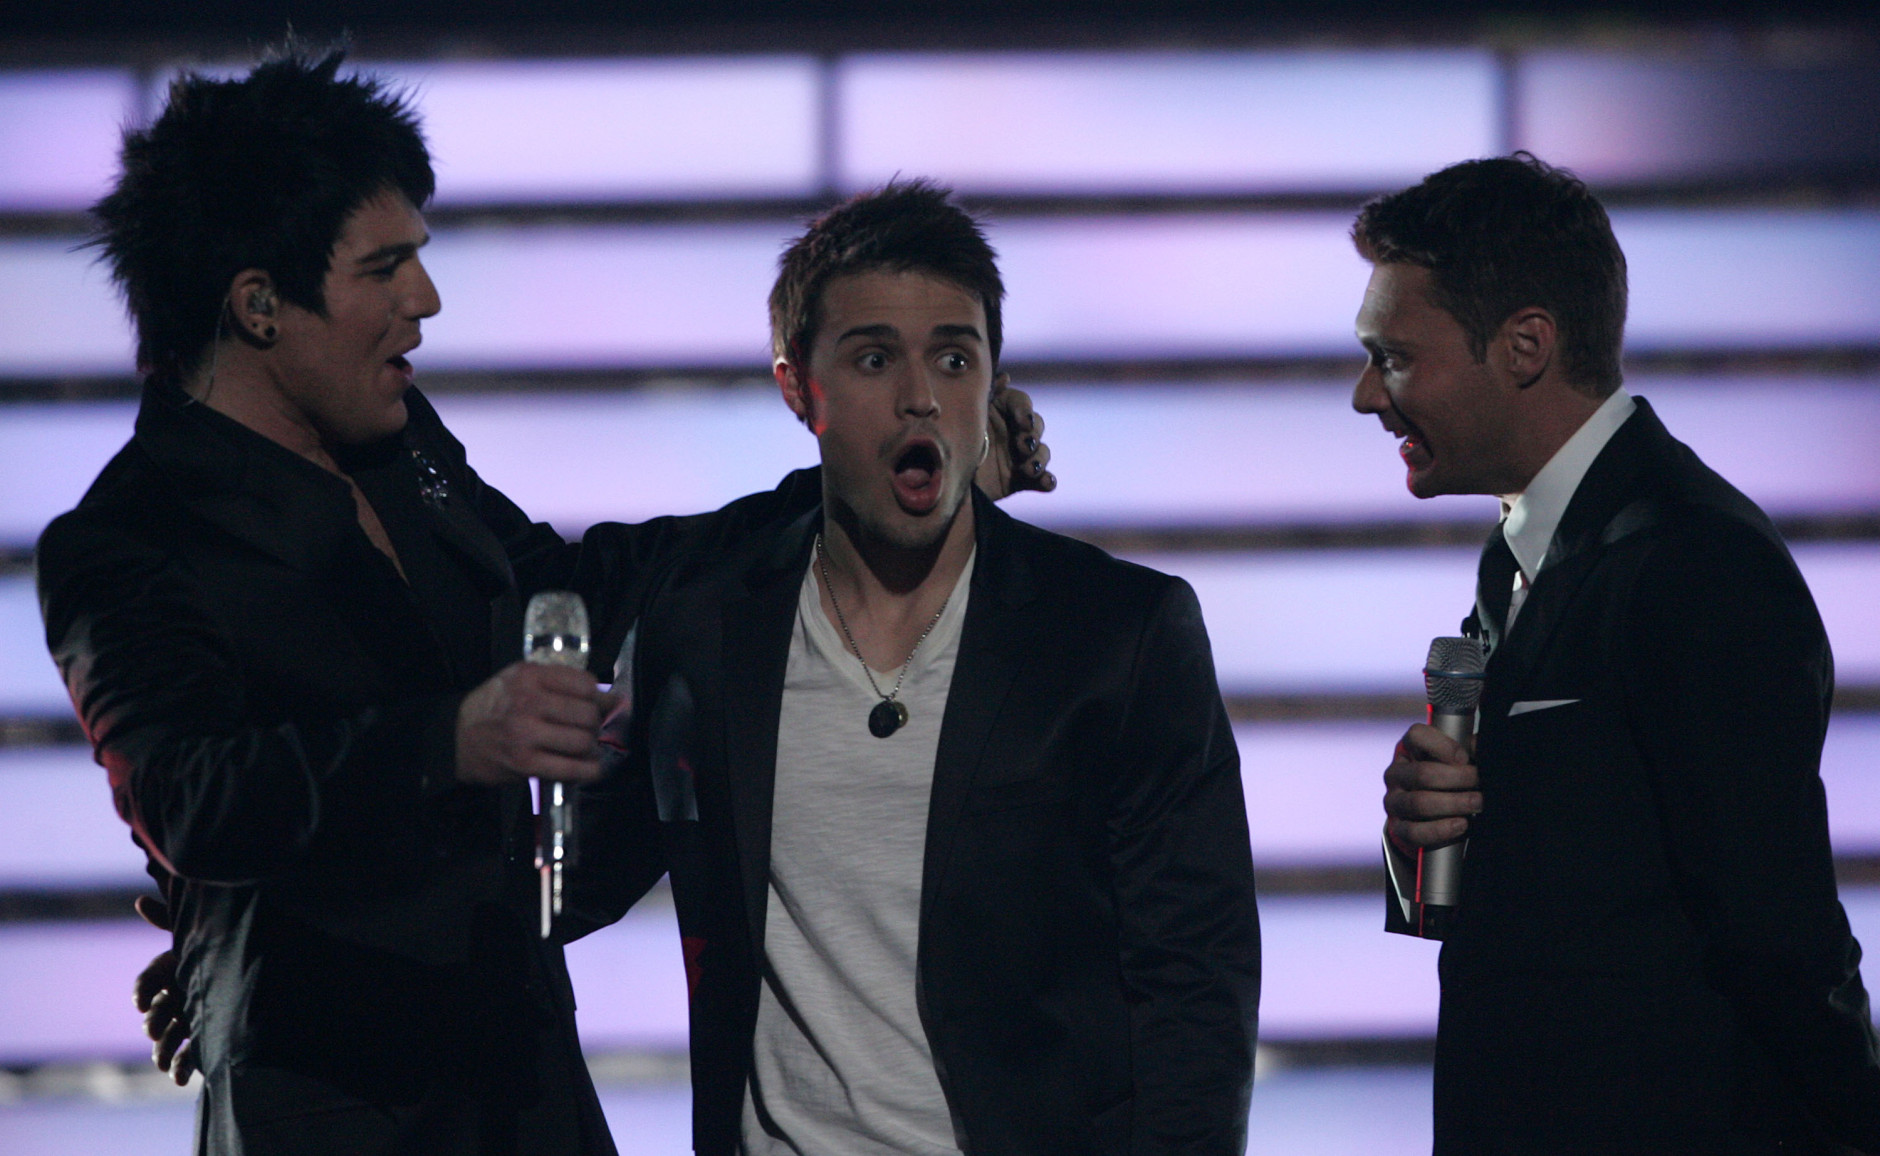 Kris Allen, center, reacts as Ryan Seacrest, right, announces the winner of American Idol on Wednesday May 20, 2009, in Los Angeles. At left, is Adam Lambert. (Evans Vestal Ward/AP Images for Fox)